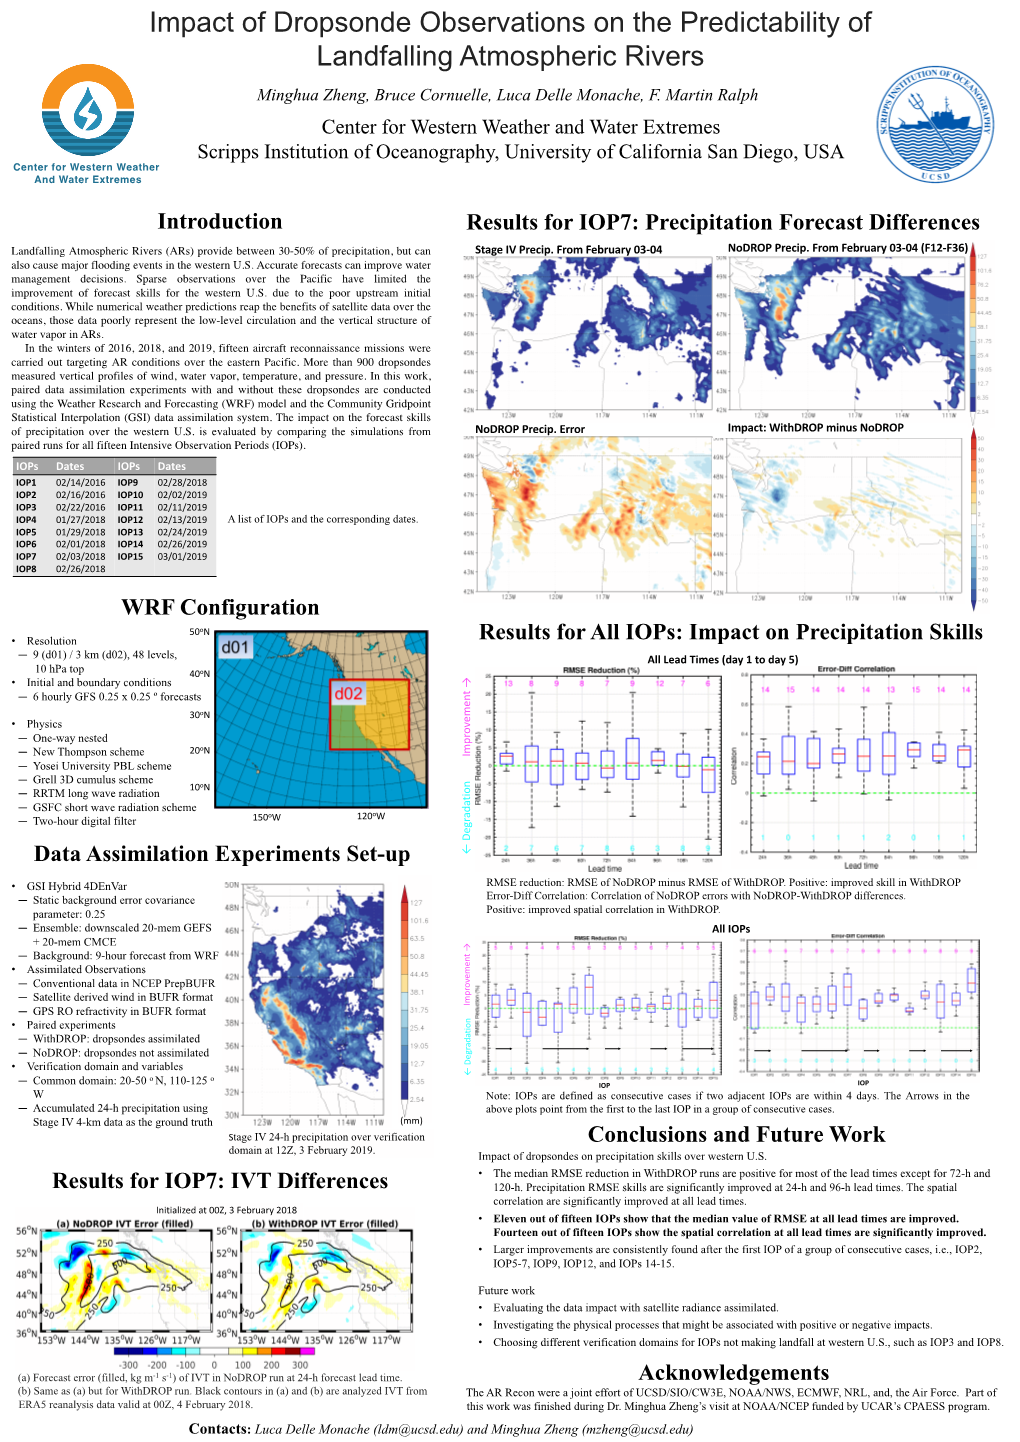 Impact of Dropsonde Observations on the Predictability of Landfalling Atmospheric Rivers Minghua Zheng, Bruce Cornuelle, Luca Delle Monache, F